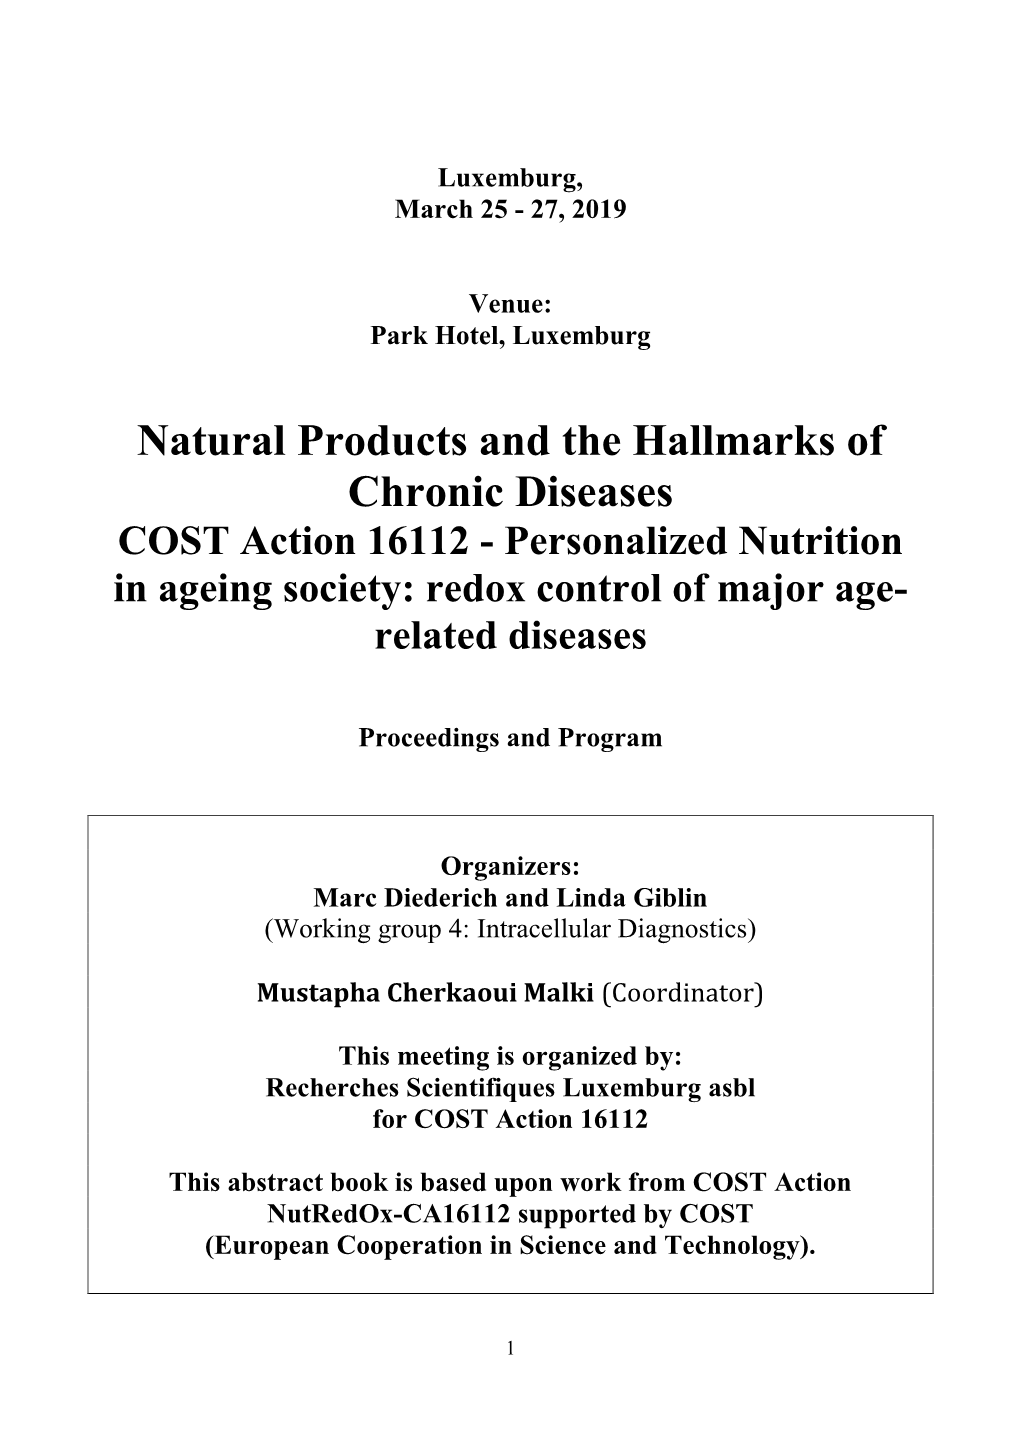 Natural Products and the Hallmarks of Chronic Diseases COST Action 16112 - Personalized Nutrition in Ageing Society: Redox Control of Major Age- Related Diseases